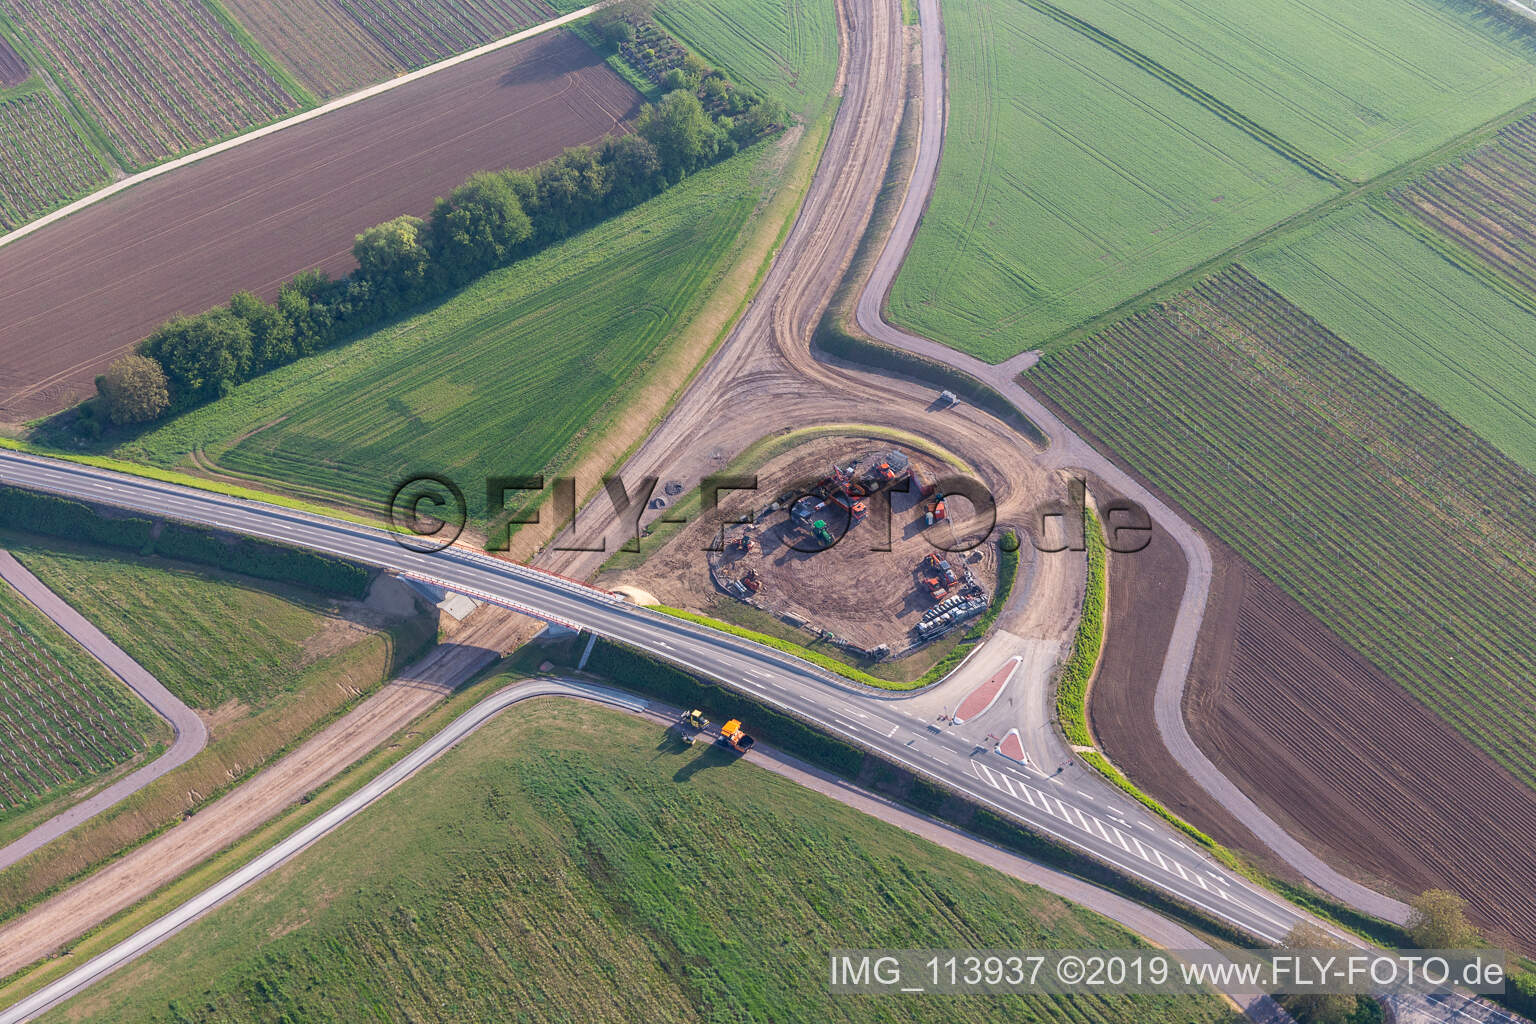 Aerial view of Bypass construction site in Impflingen in the state Rhineland-Palatinate, Germany